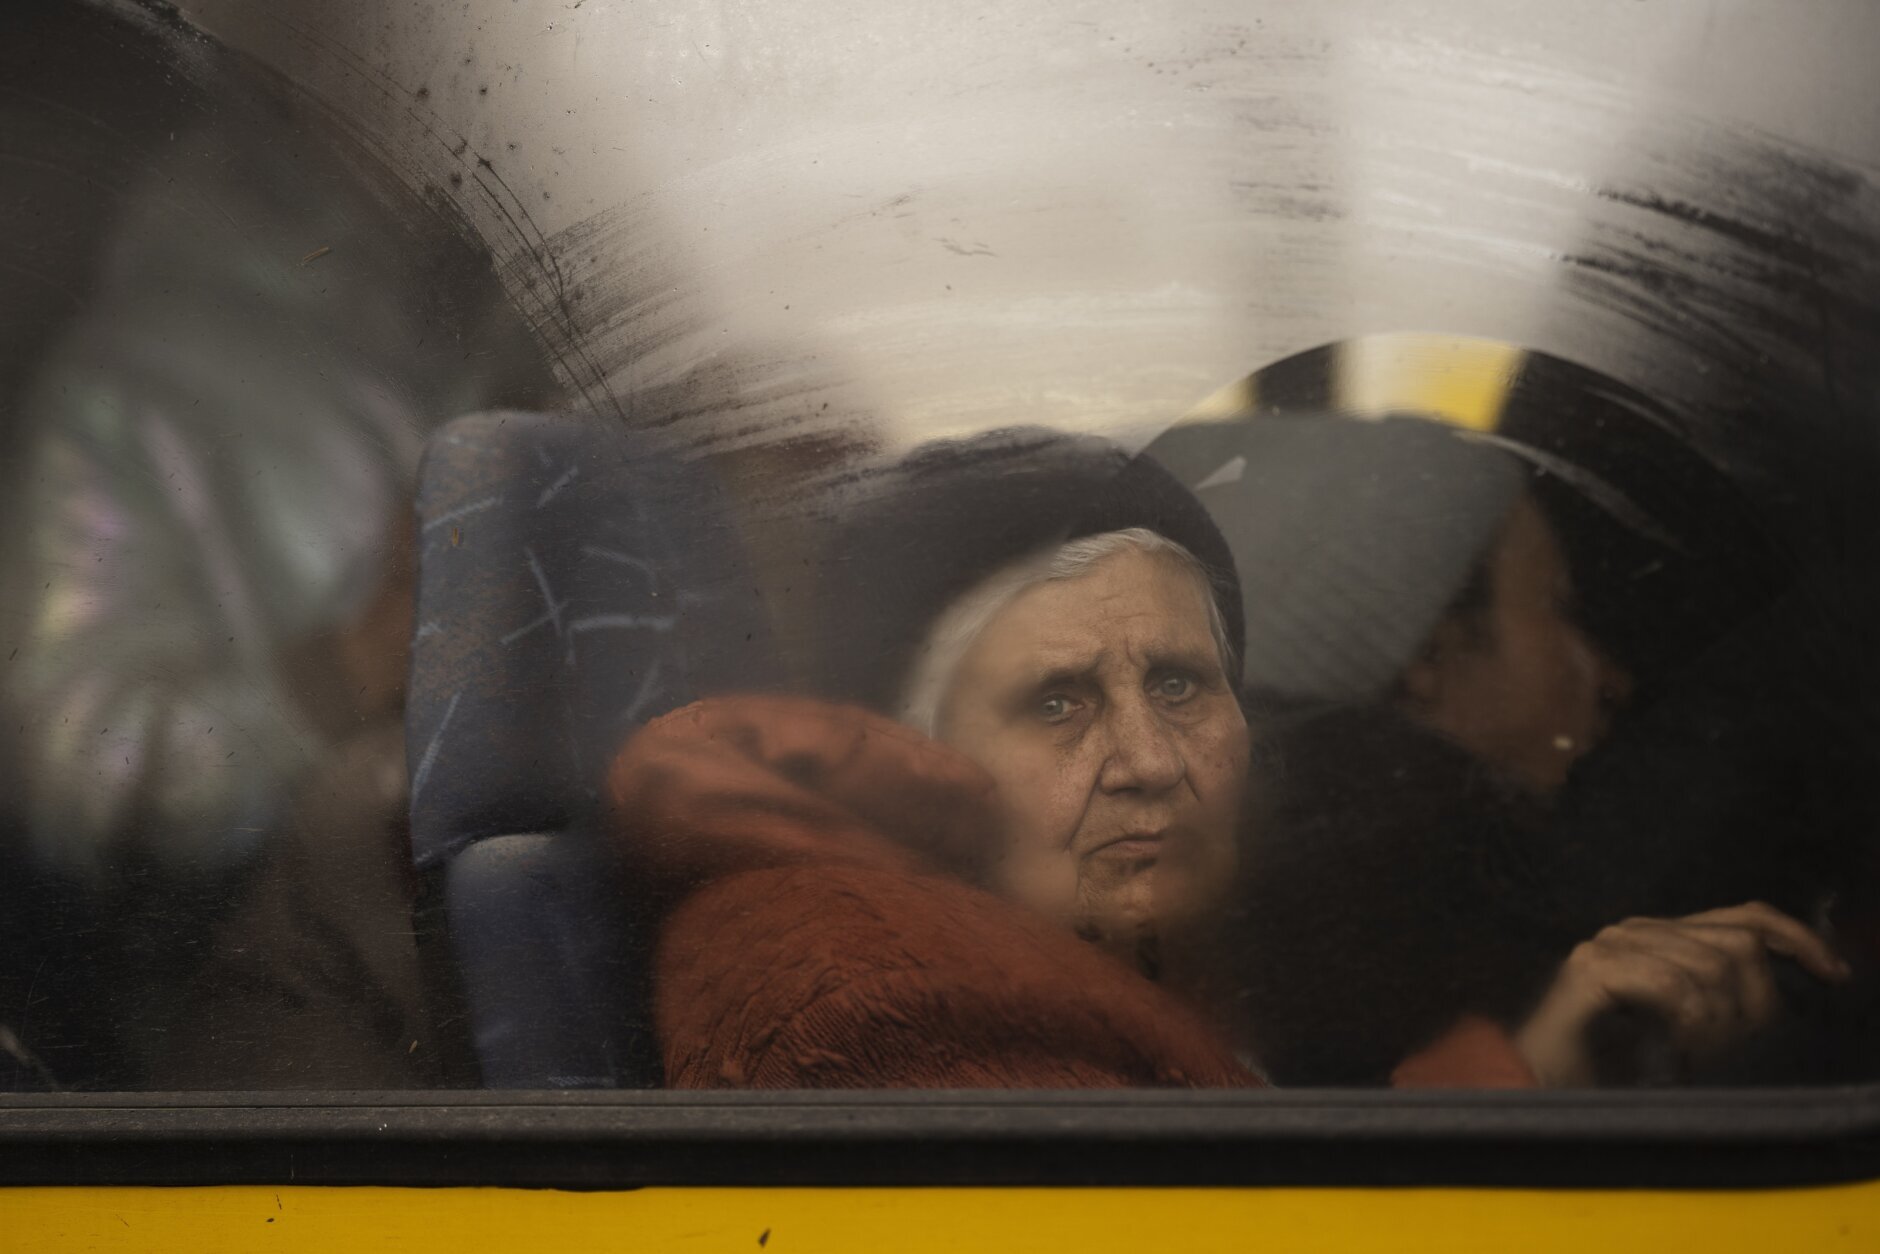 An internally displaced elderly woman from Mariupol looks out of a bus after window arriving at a refugee center fleeing from the Russian attacks, in Zaporizhzhia, Ukraine, Thursday, April 21, 2022. Mariupol, which is part of the industrial region in eastern Ukraine known as the Donbas, has been a key Russian objective since the Feb. 24 invasion began. (AP Photo/Leo Correa)